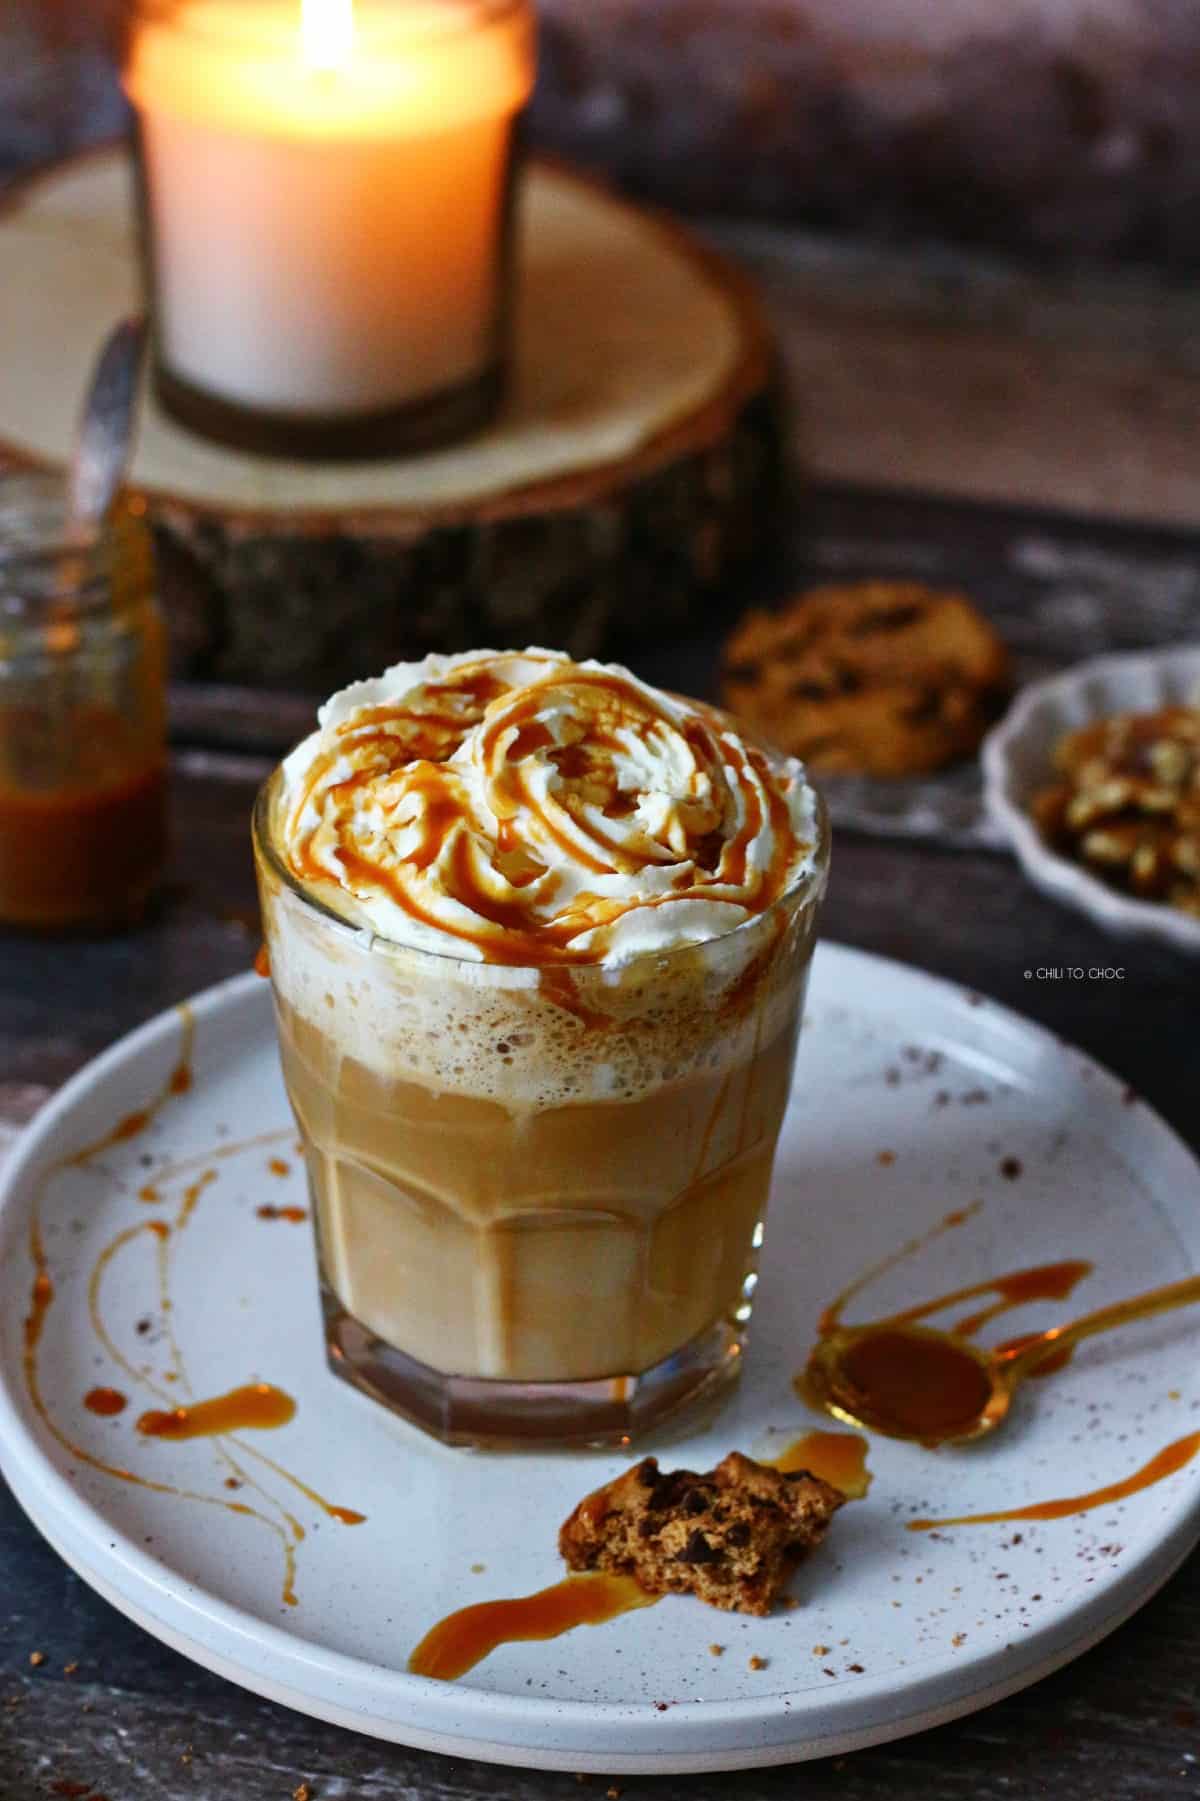 Caramel latte on a place smeared with caramel sauce and walnuts and cookies around it.